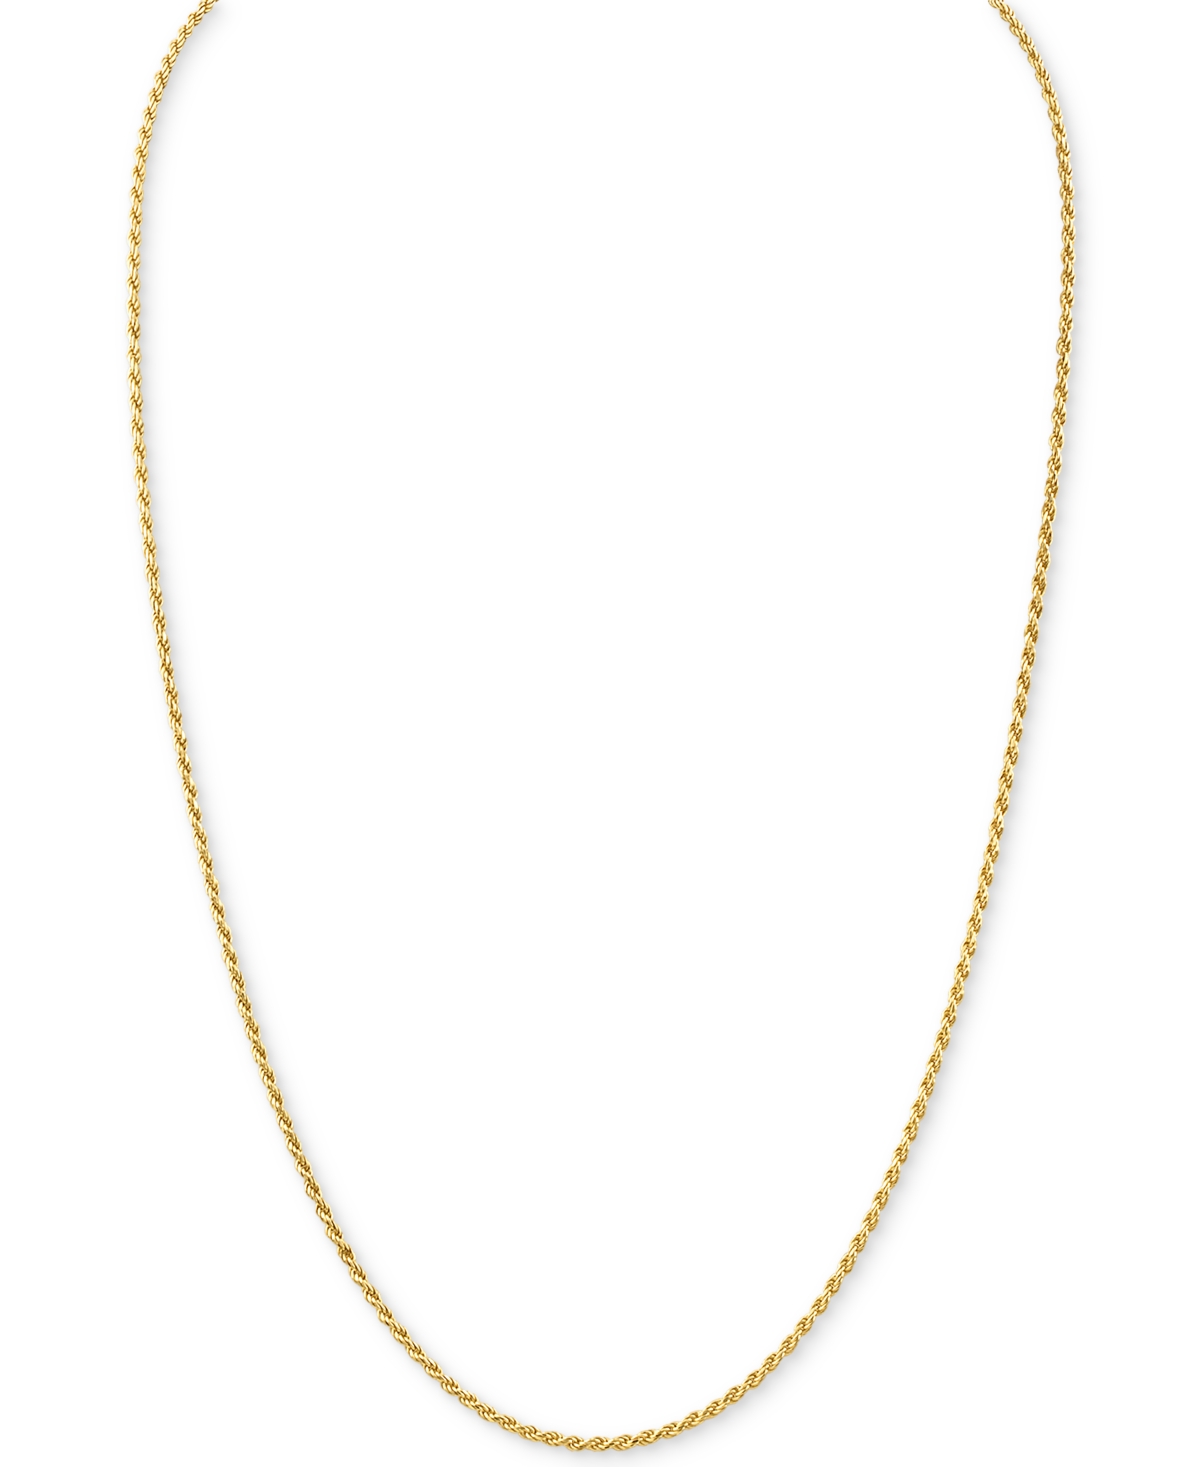 Rope Link 24" Chain Necklace, Created for Macy's - Silver